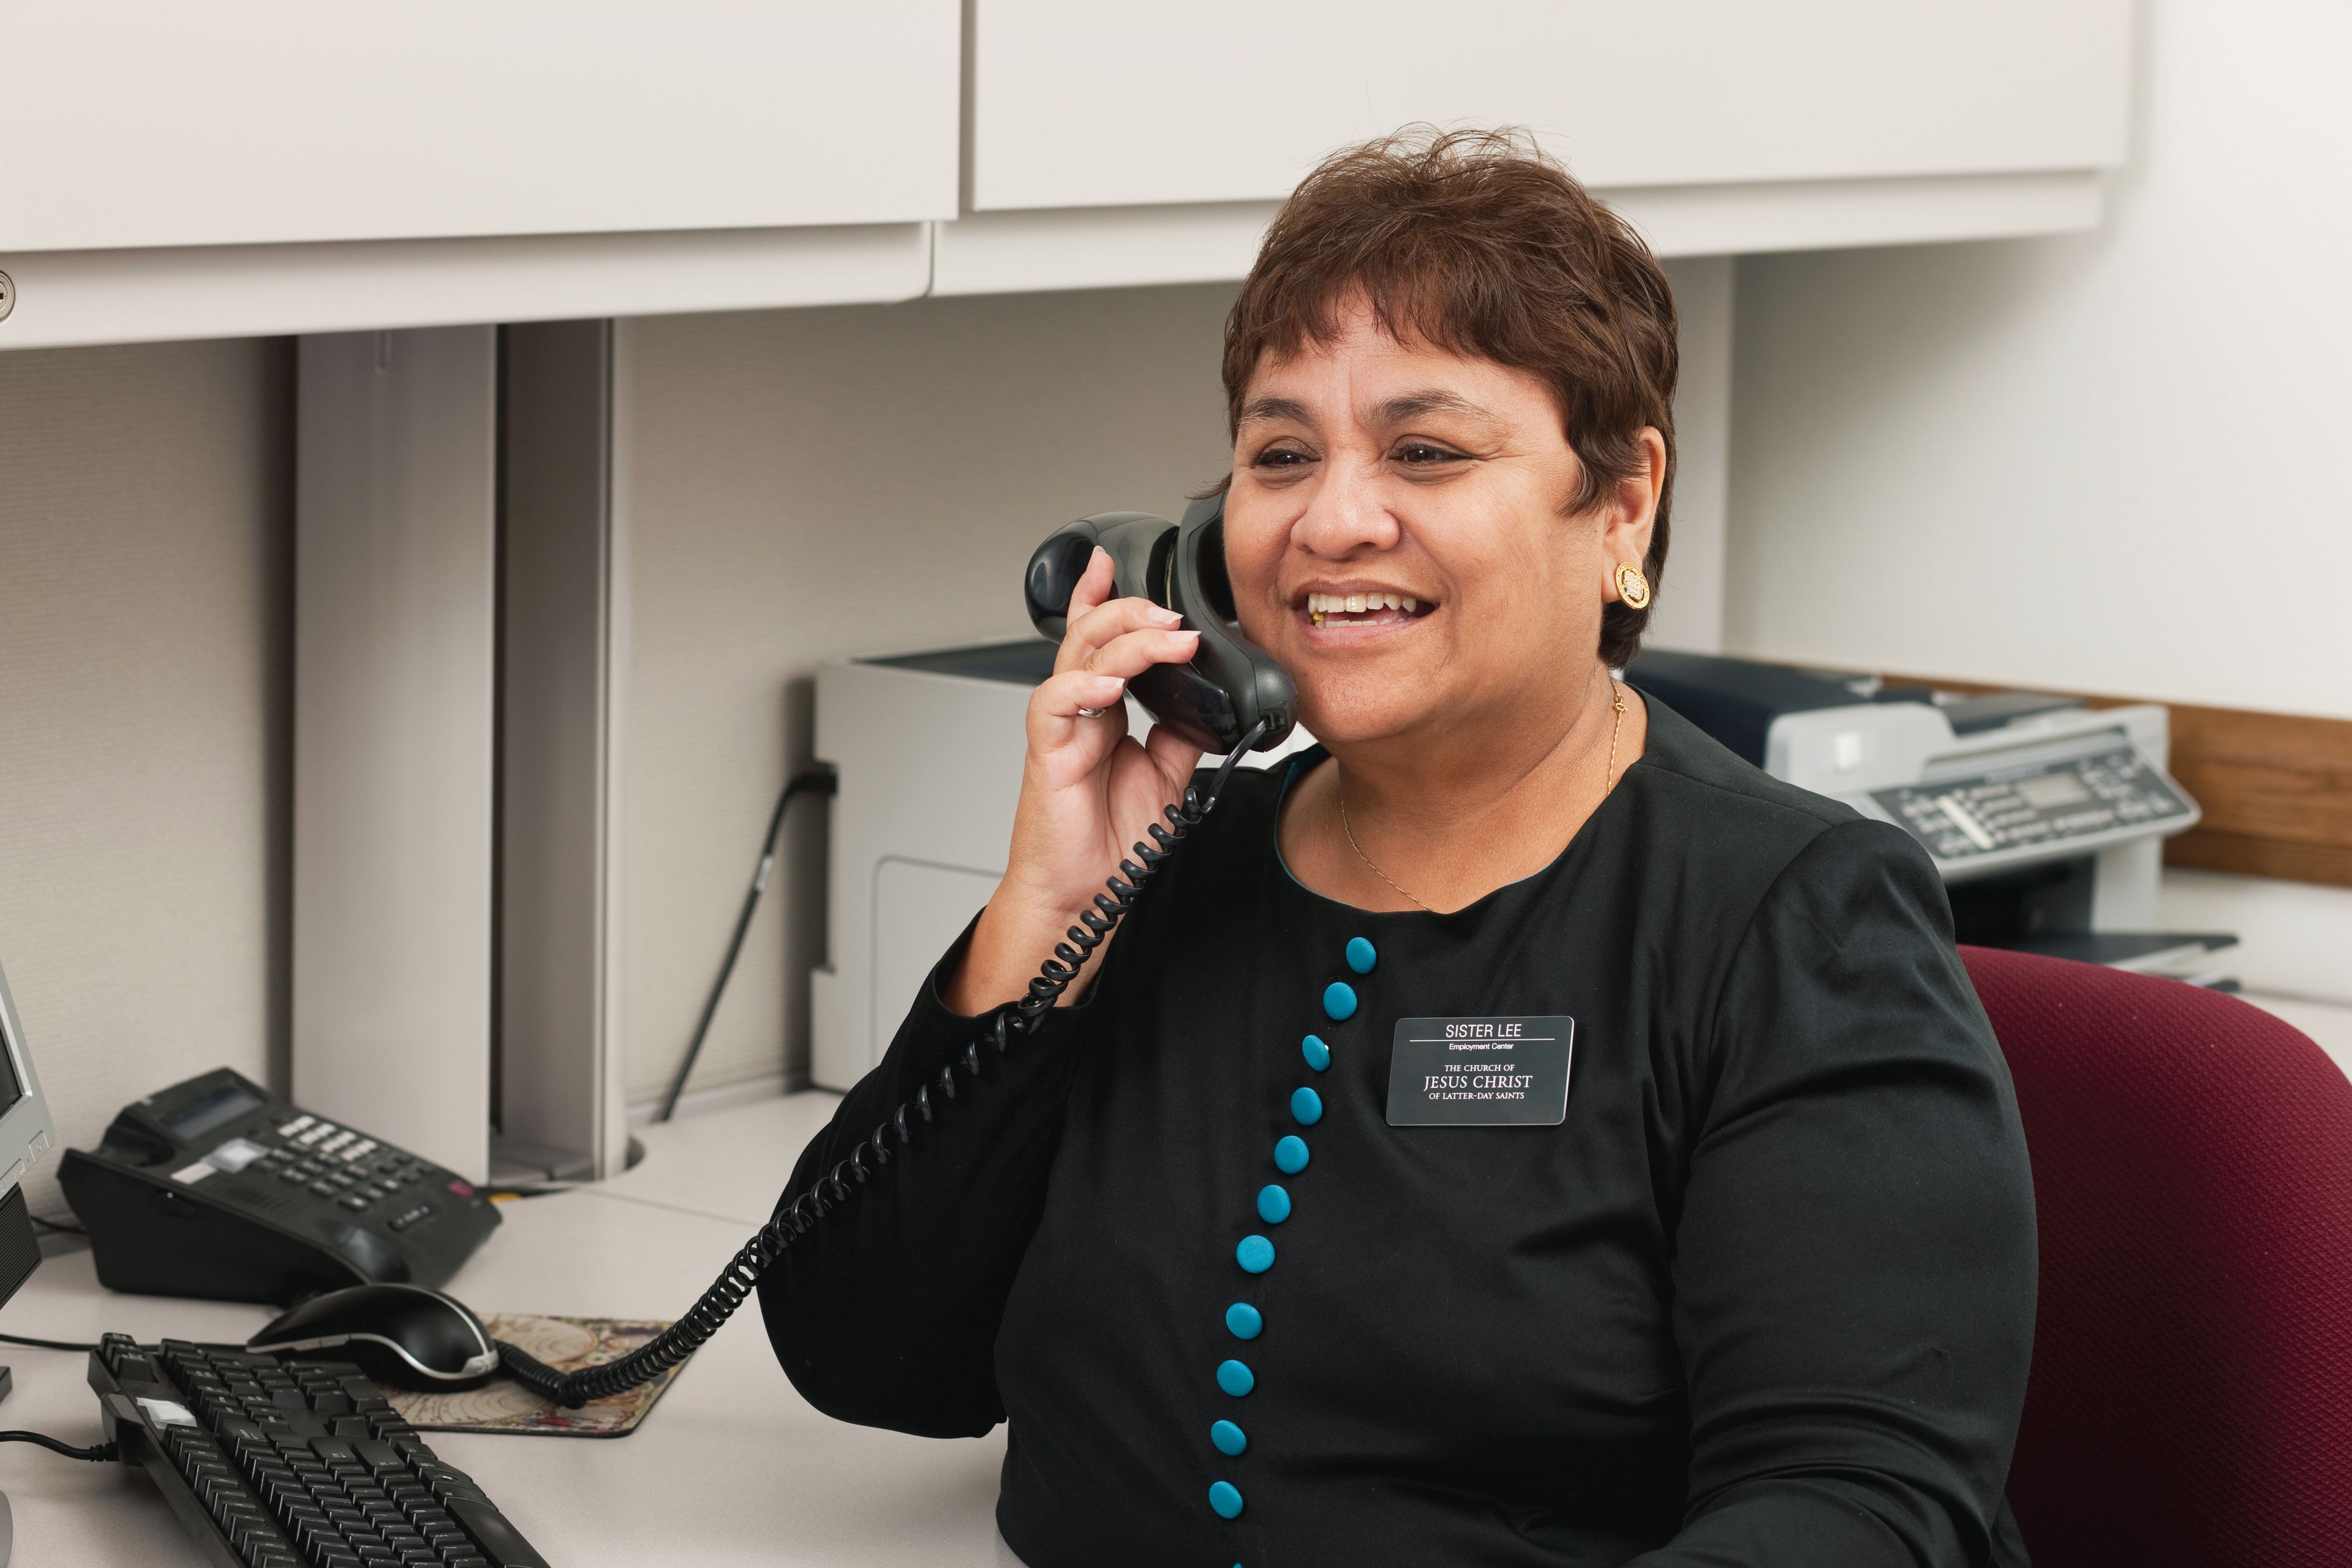 A senior sister missionary on the phone at the LDS employment resource center.